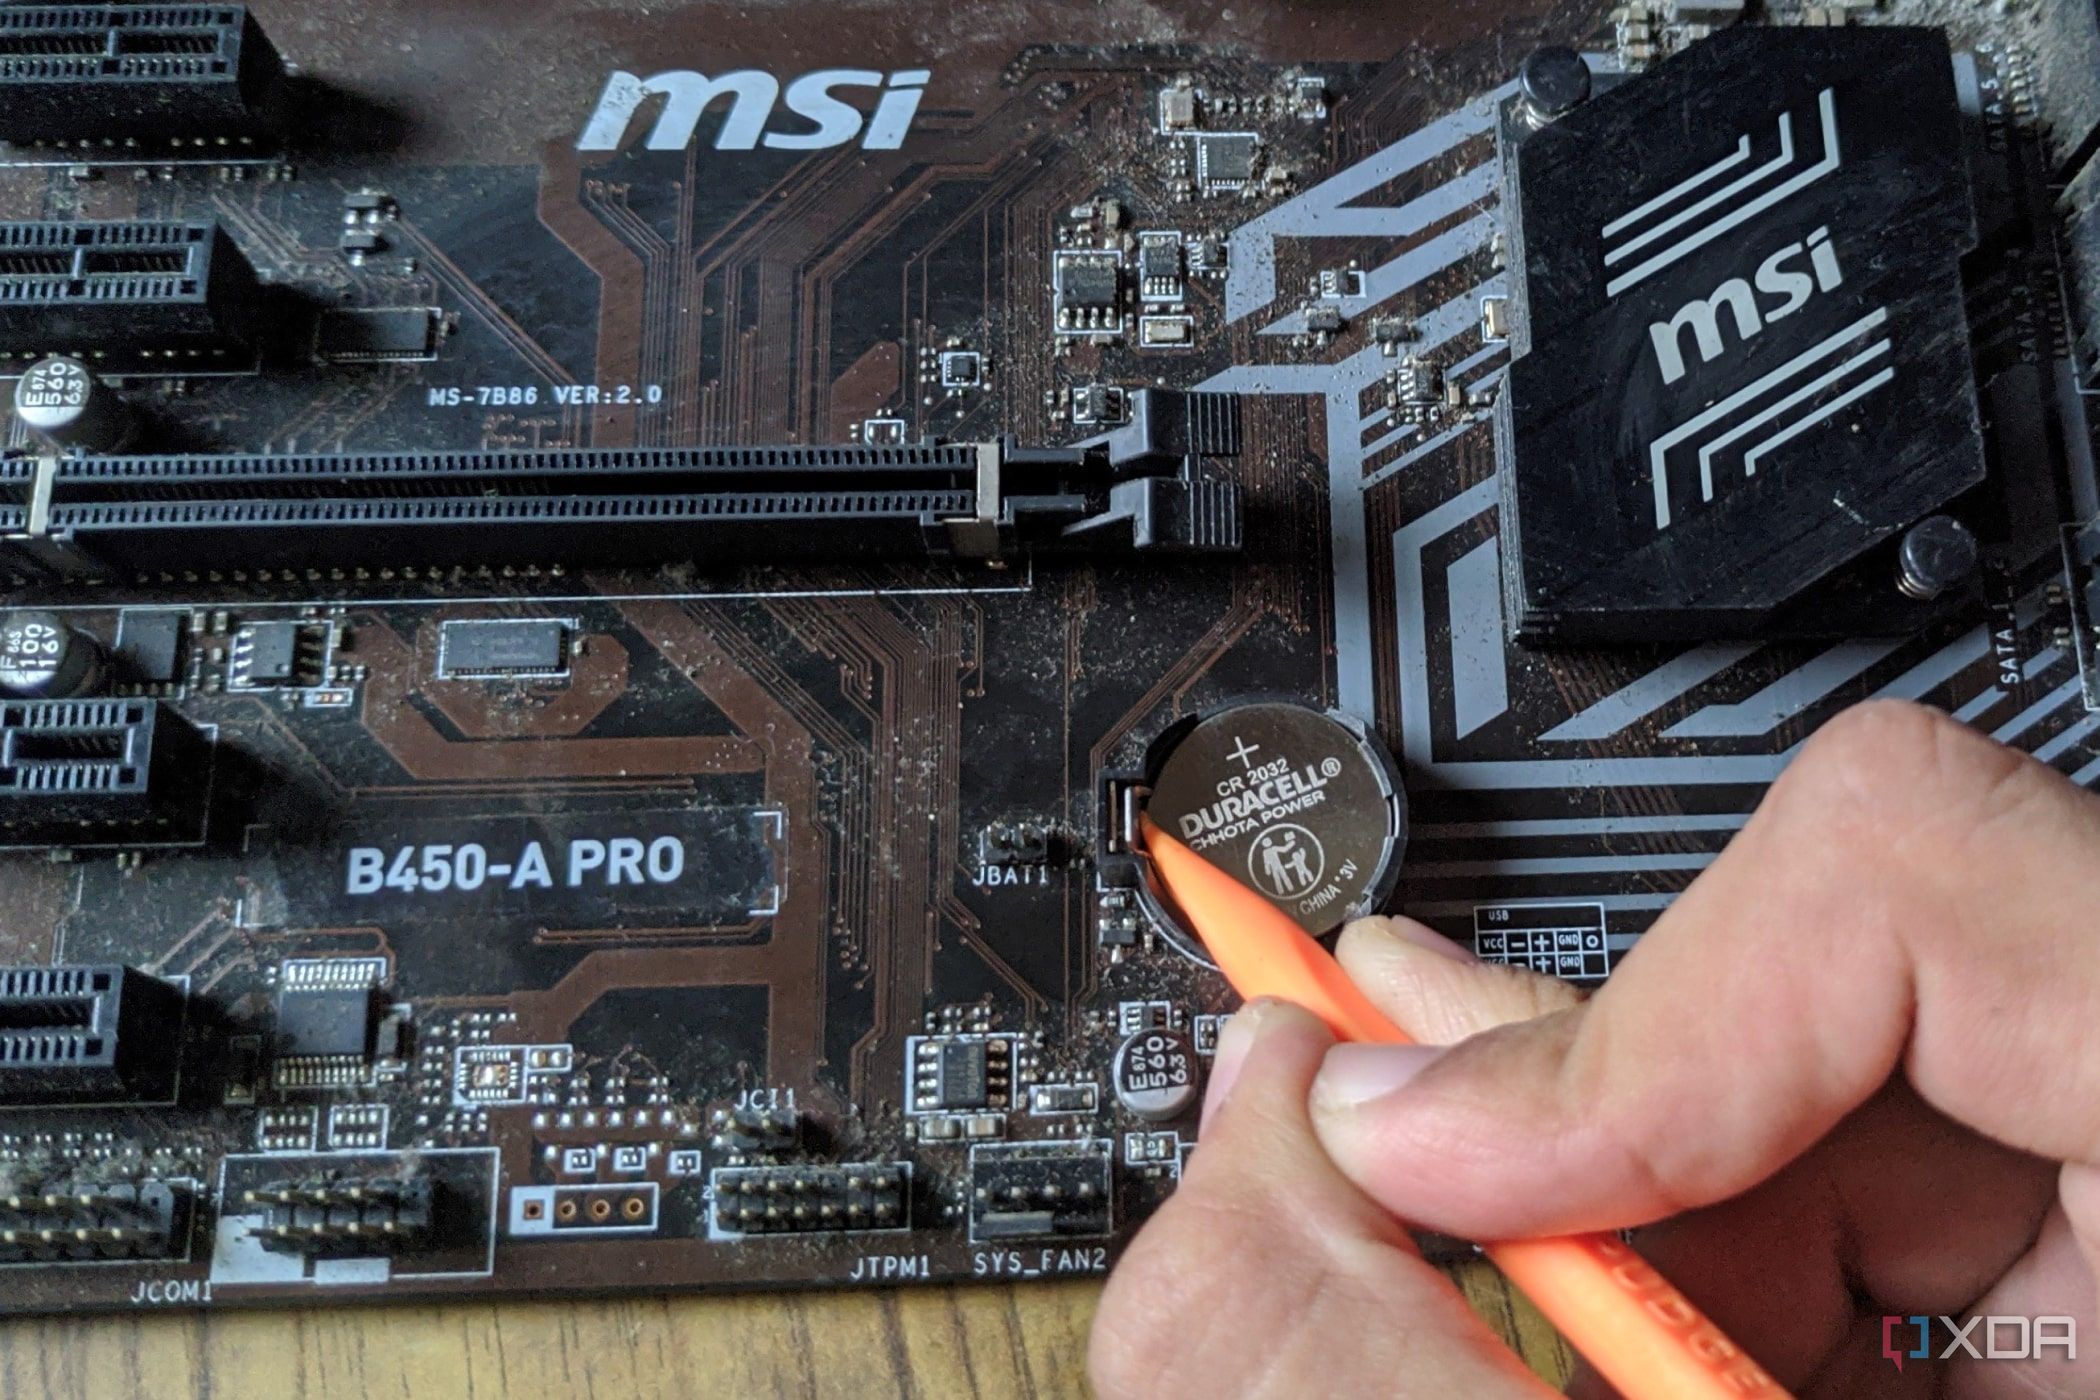 An image of a CMOS battery inside an MSI B450-A Pro motherboard